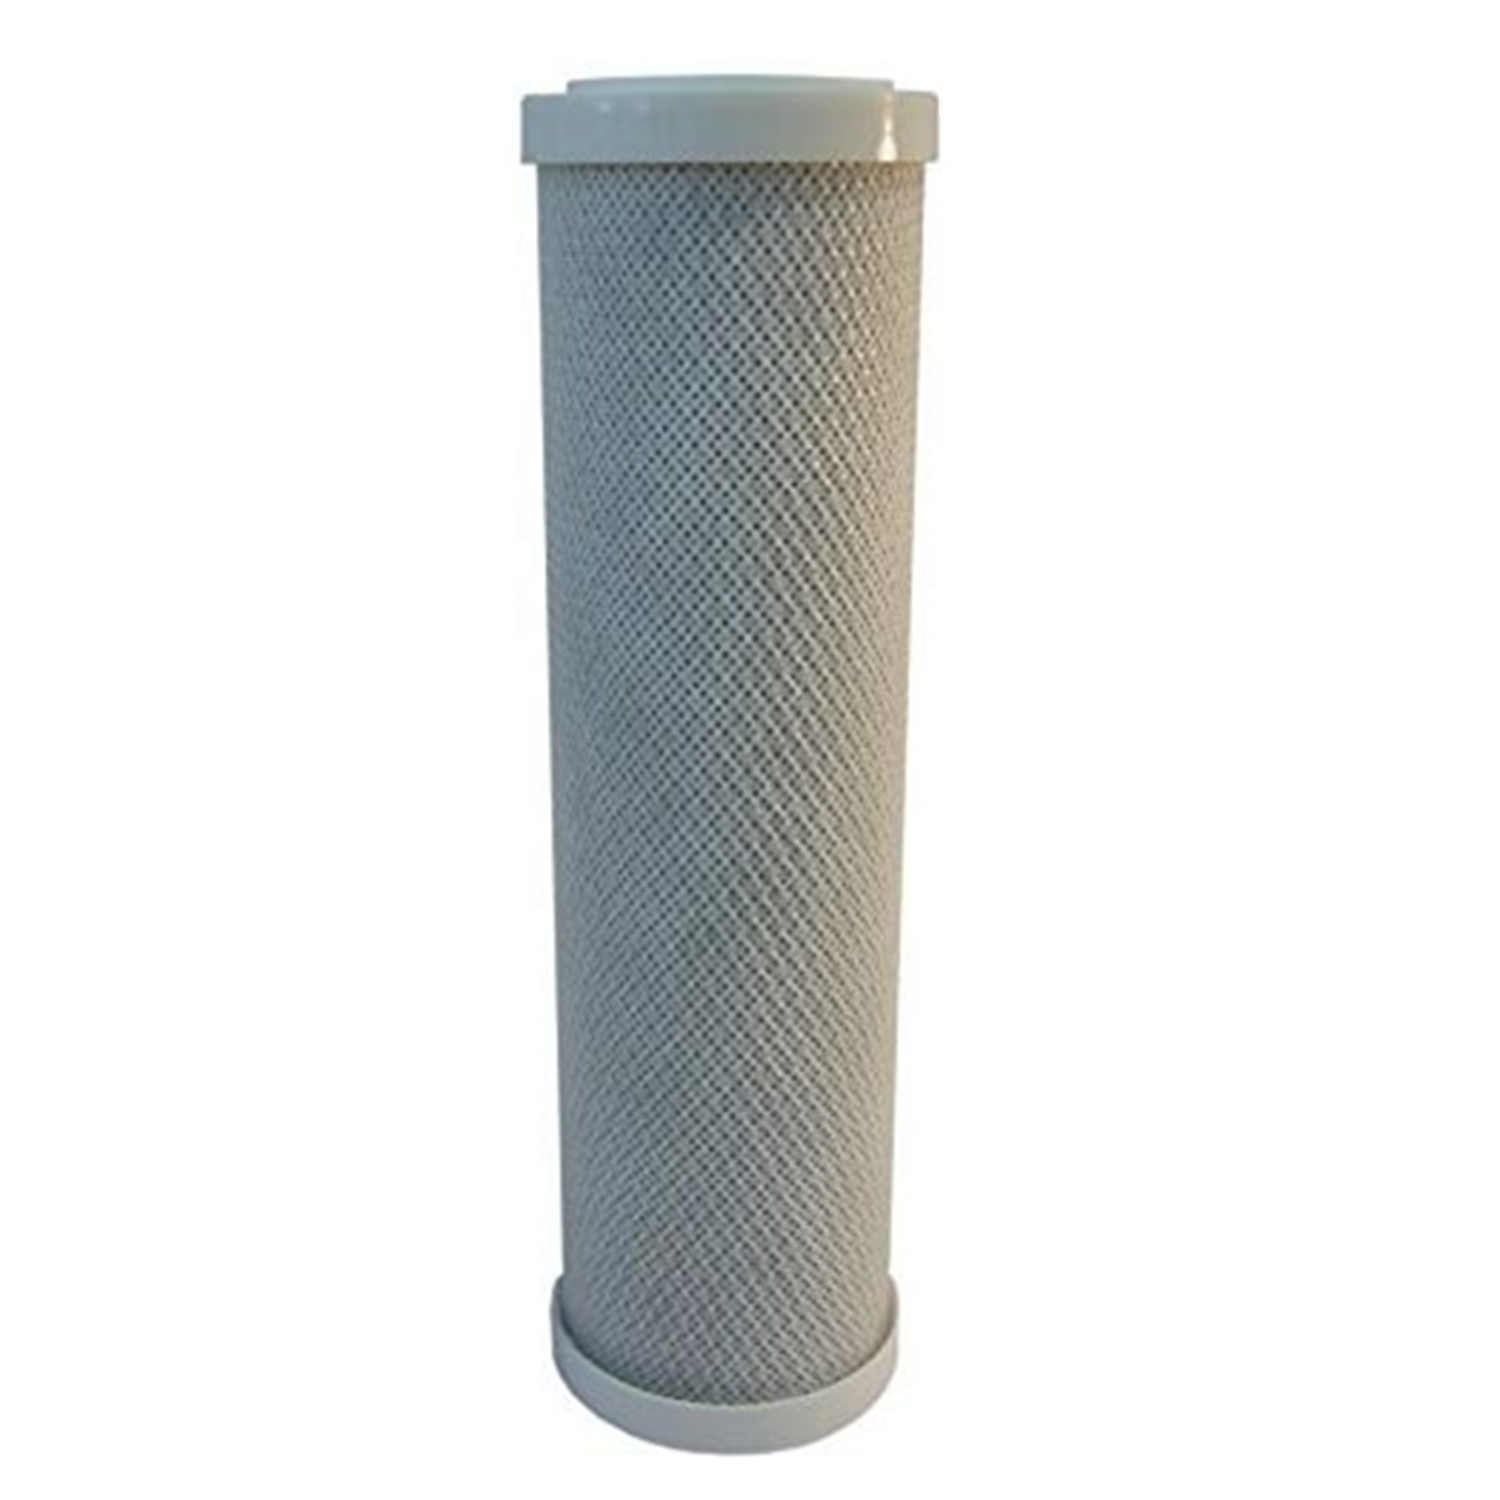 product-Ocpuritech-Cto Activated Carbon Water Filter Cartridge Block Filter Cartridge-img